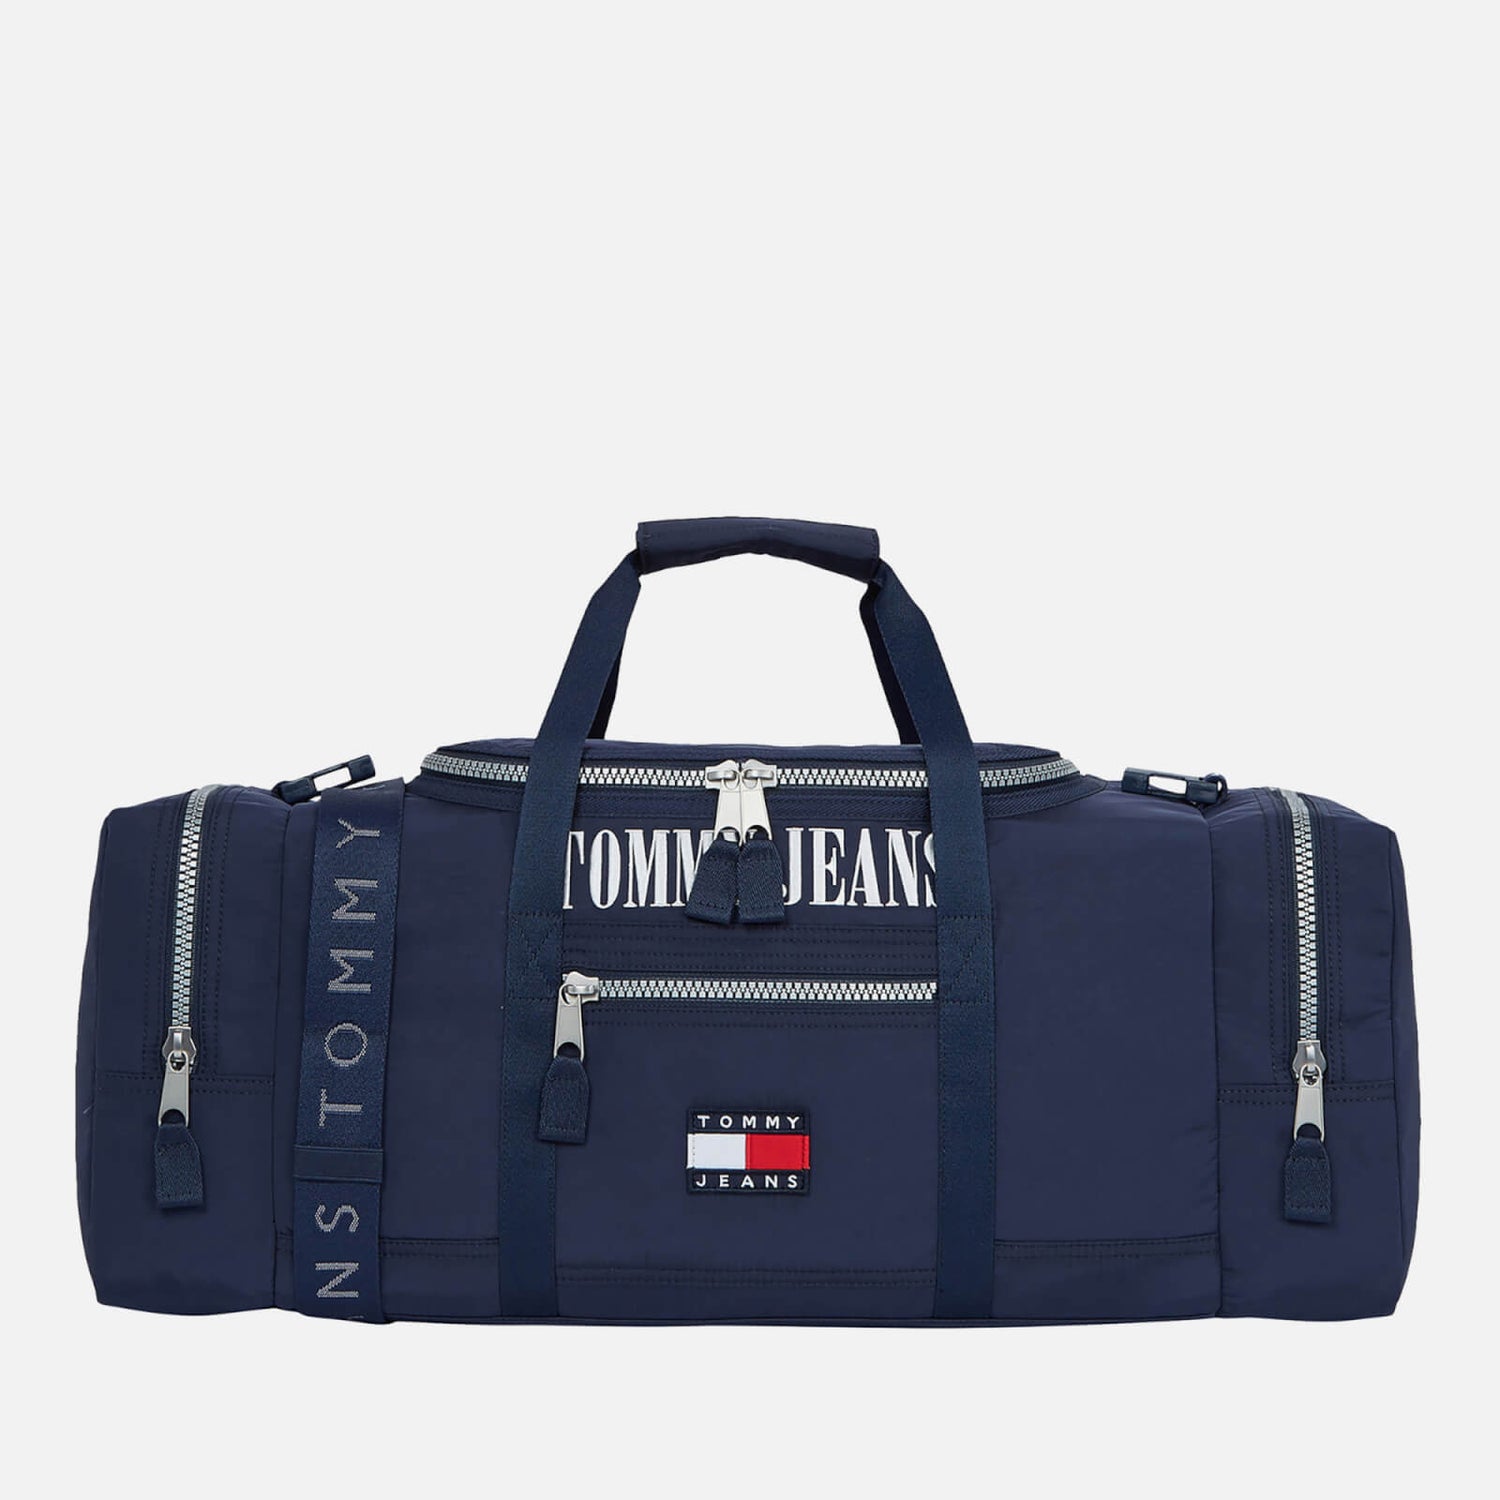 Tommy Jeans Heritage Canvas Duffle Bag